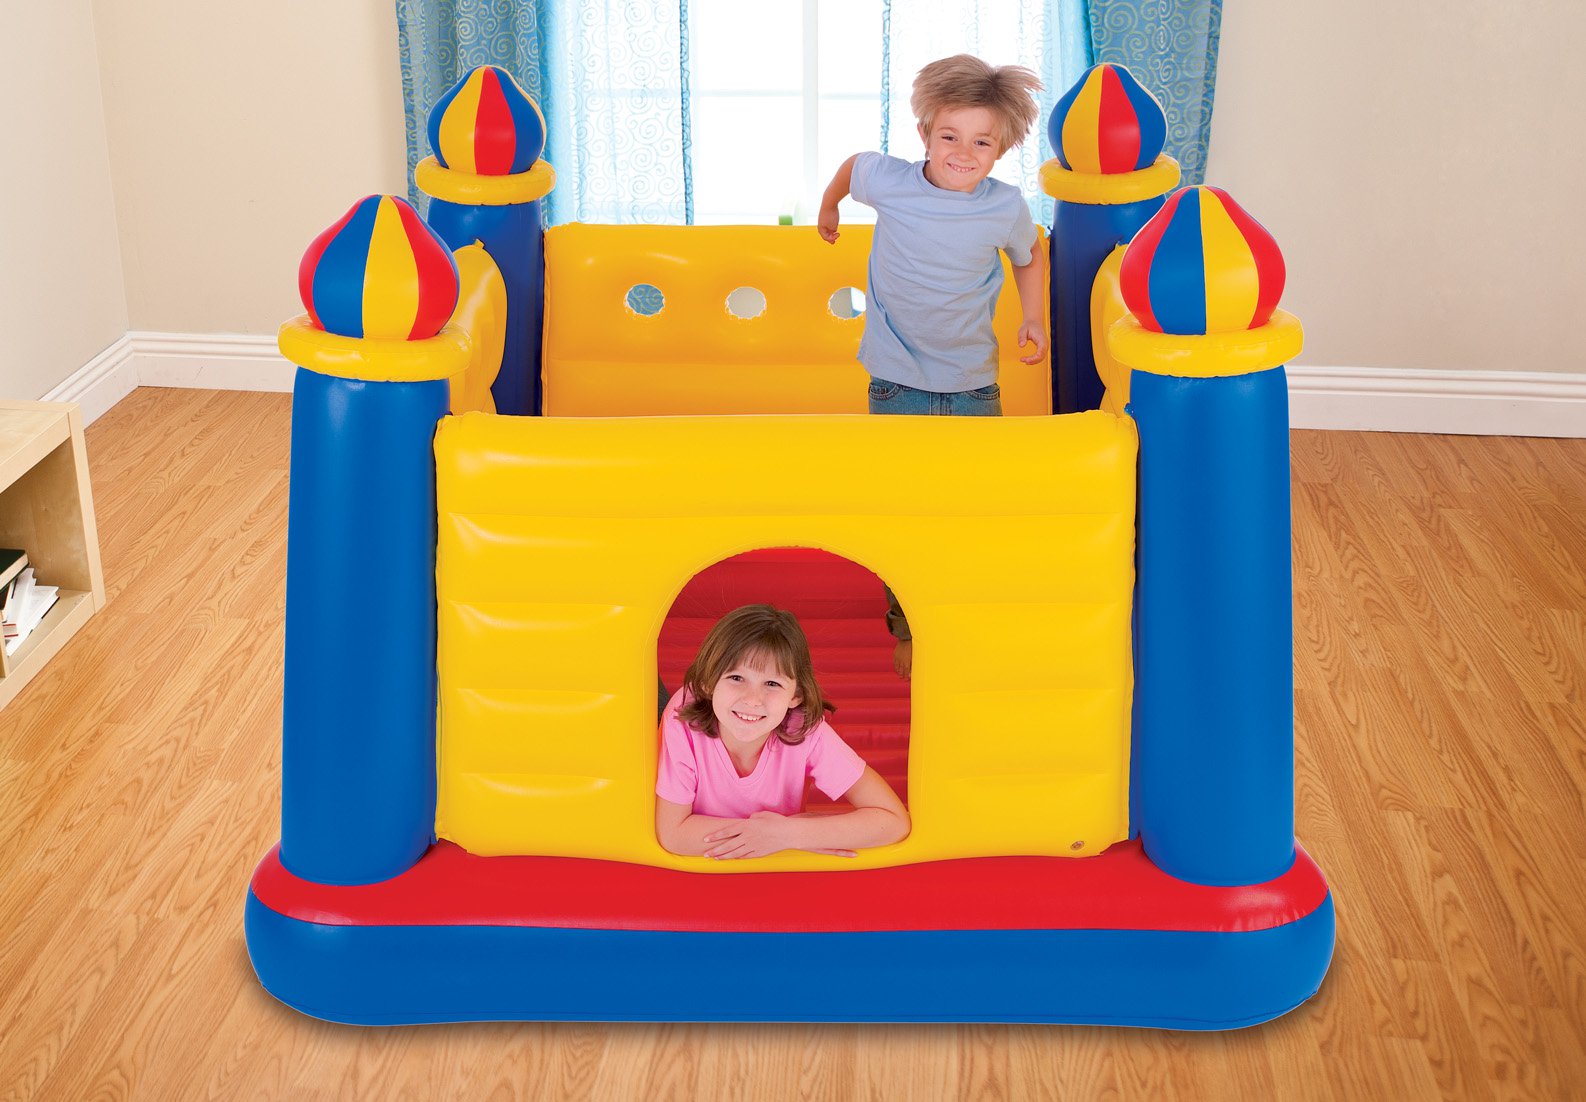 Intex Inflatable Colorful Jump-O-Lene Kids Ball Pit Castle Bouncer for Ages 3-6 - image 4 of 7